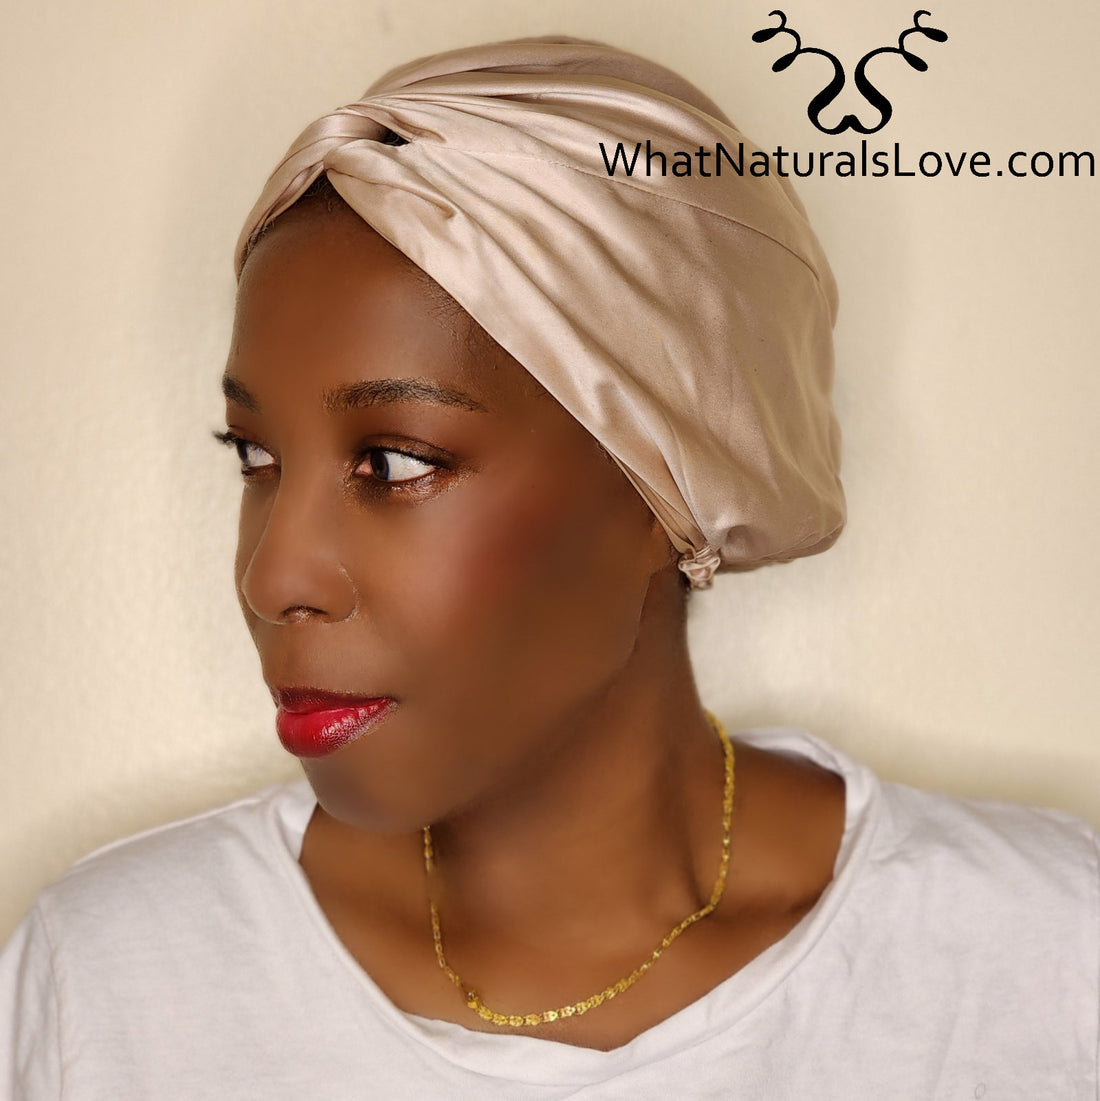 Silk Bonnet Amara De Luxe 100% Mulberry Silk to protect Locs and Natural Hair Perfect for Mother&